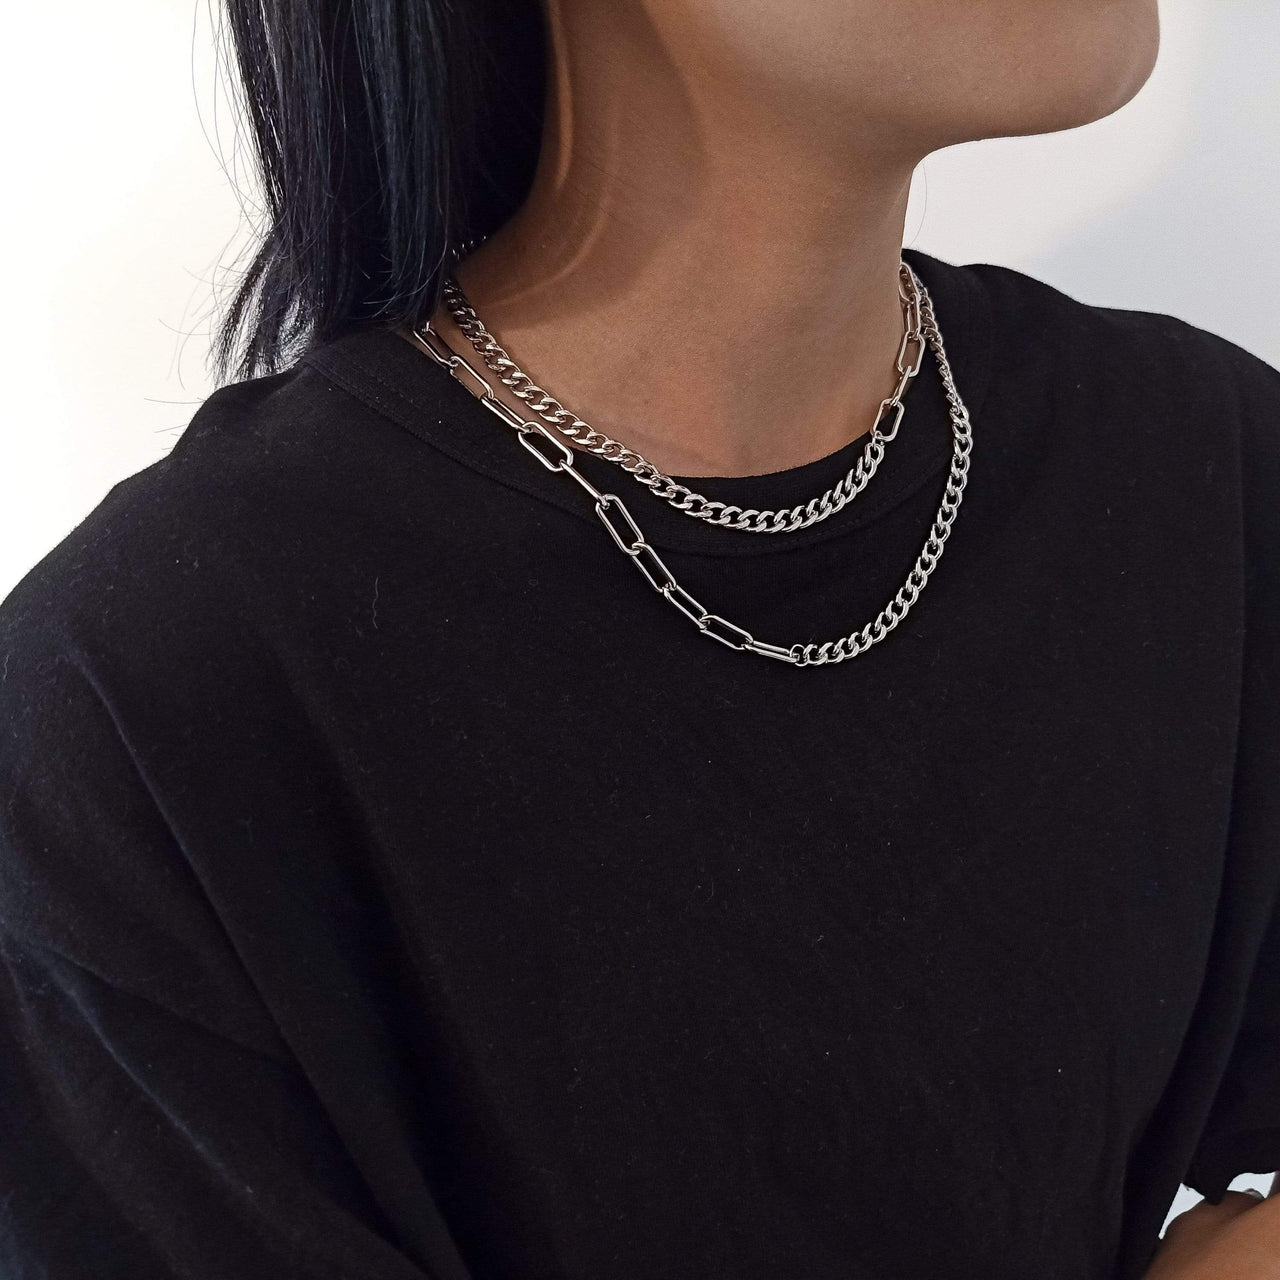 Stainless Steel Layered Curb Link Chain Necklace Set - ArtGalleryZen